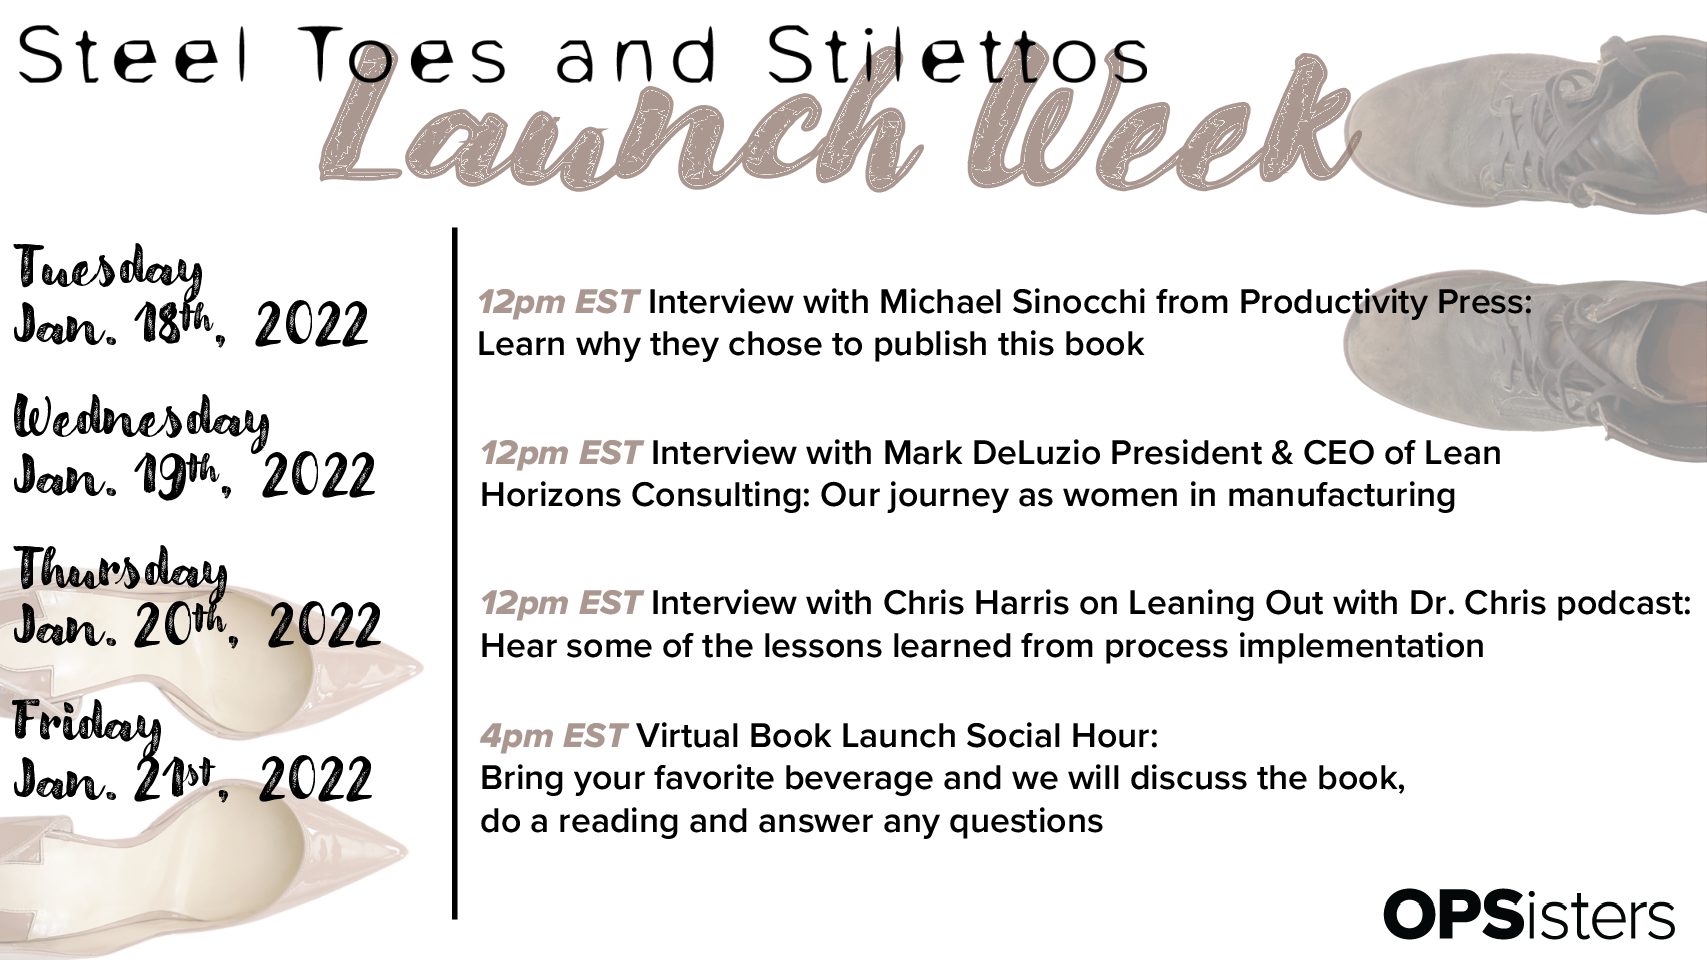 Steel Toes and Stilettos Book Launch Week